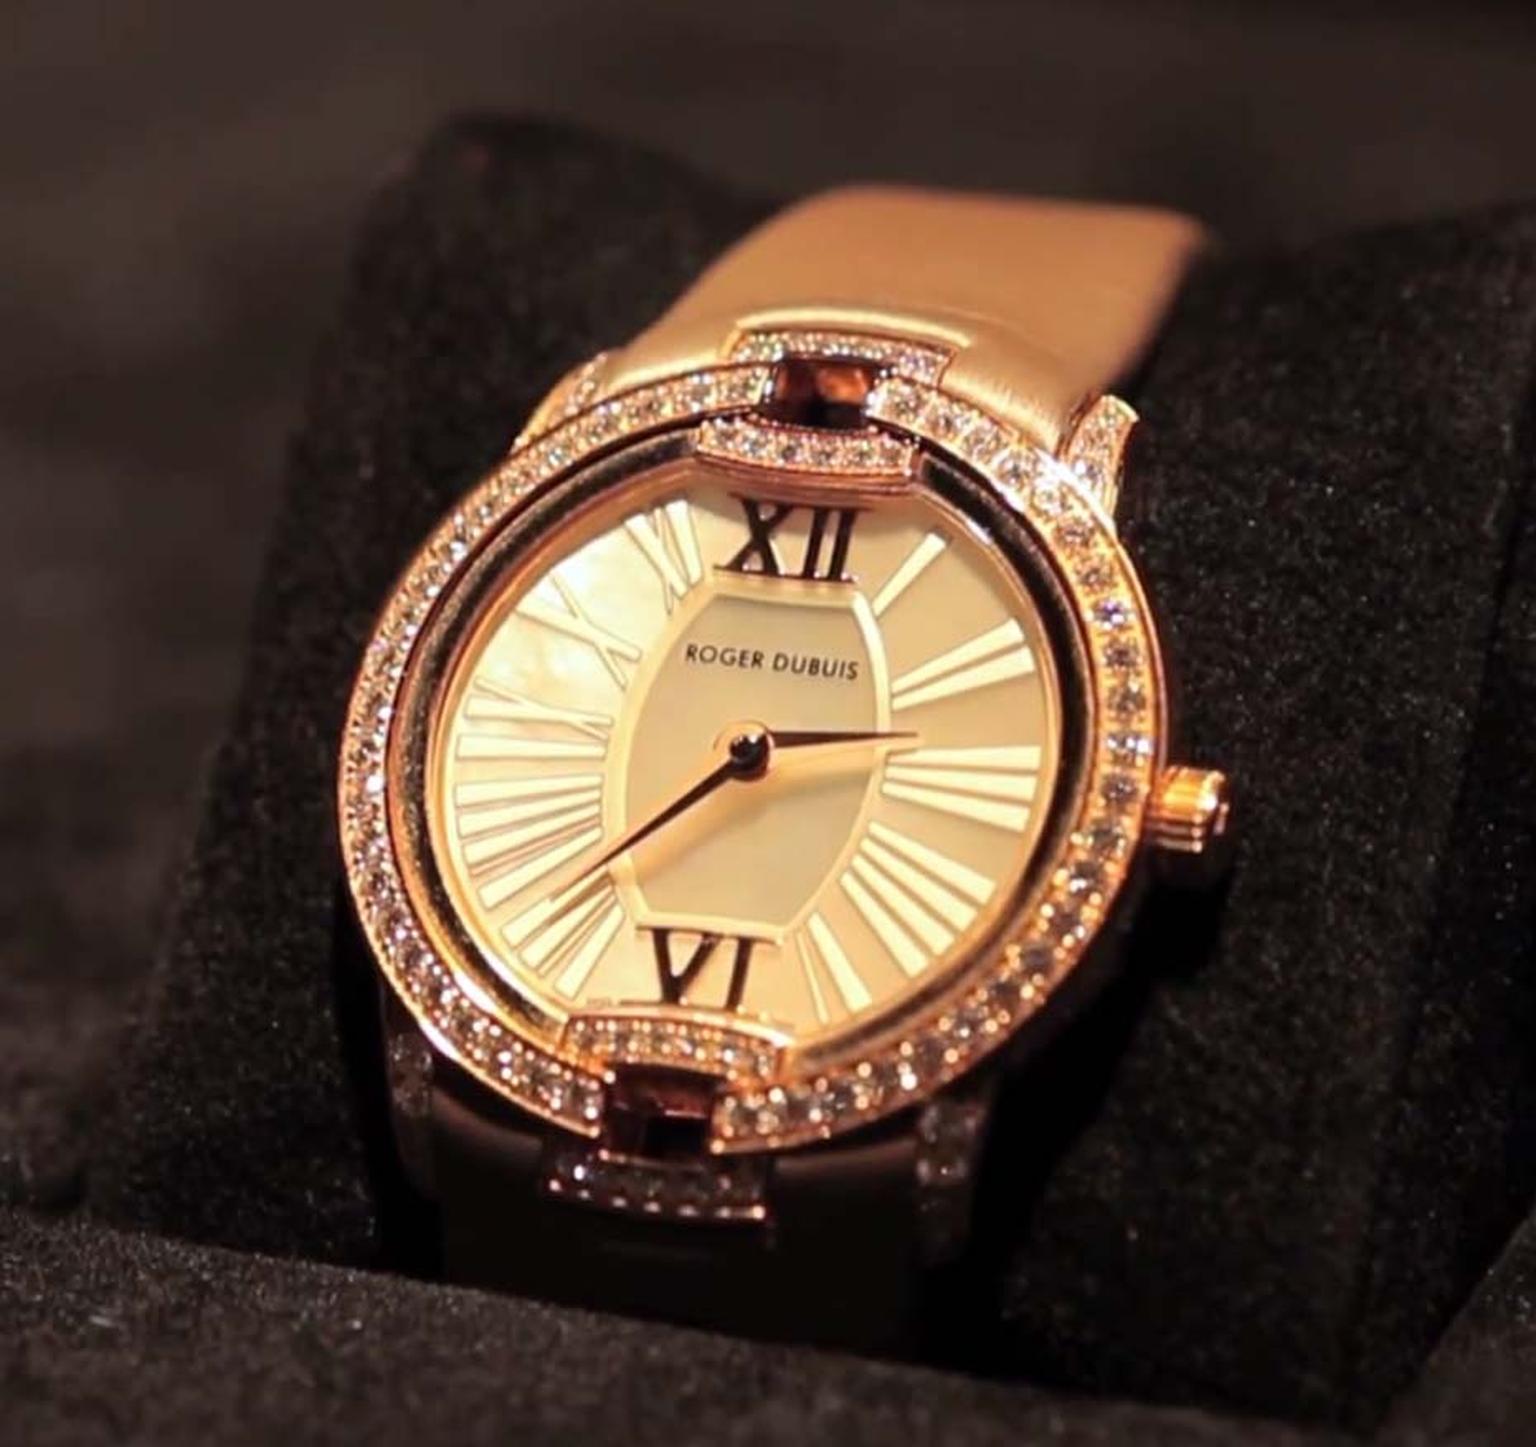 Roger Dubuis Velvet watch with diamonds and pink sapphires